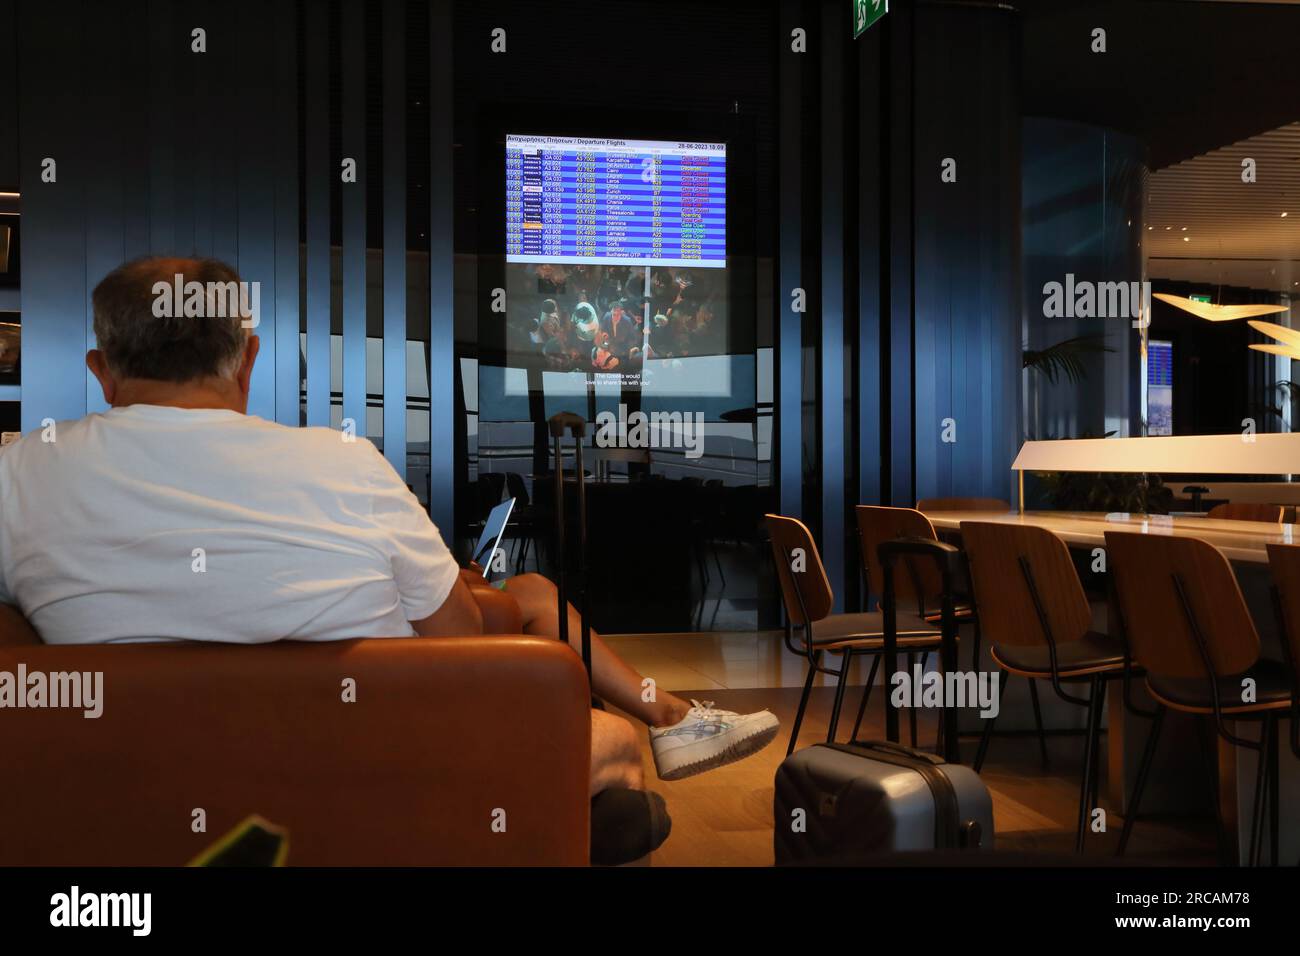 Athens Greece Athens International Airport (AIA) Eleftherios Venizelos Man Waiting in Executive Lounge Electronic Departures Board Stock Photo